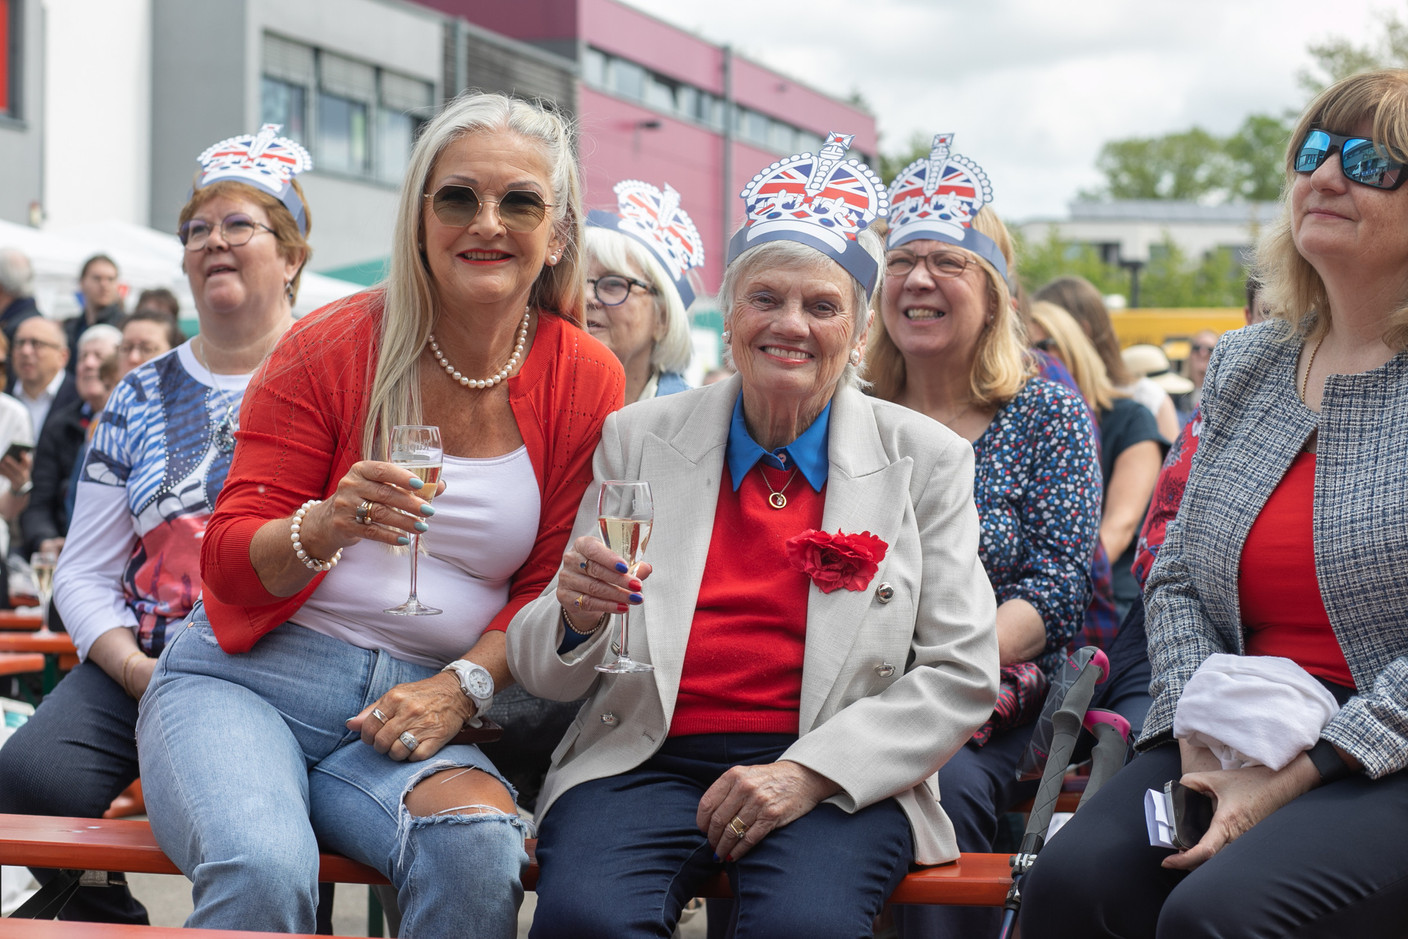 People attending an event at St George’s International School in Luxembourg on 6 May 2023 to celebrate the coronation of King Charles III and Queen Camilla. Photo: Matic Zorman / Maison Moderne